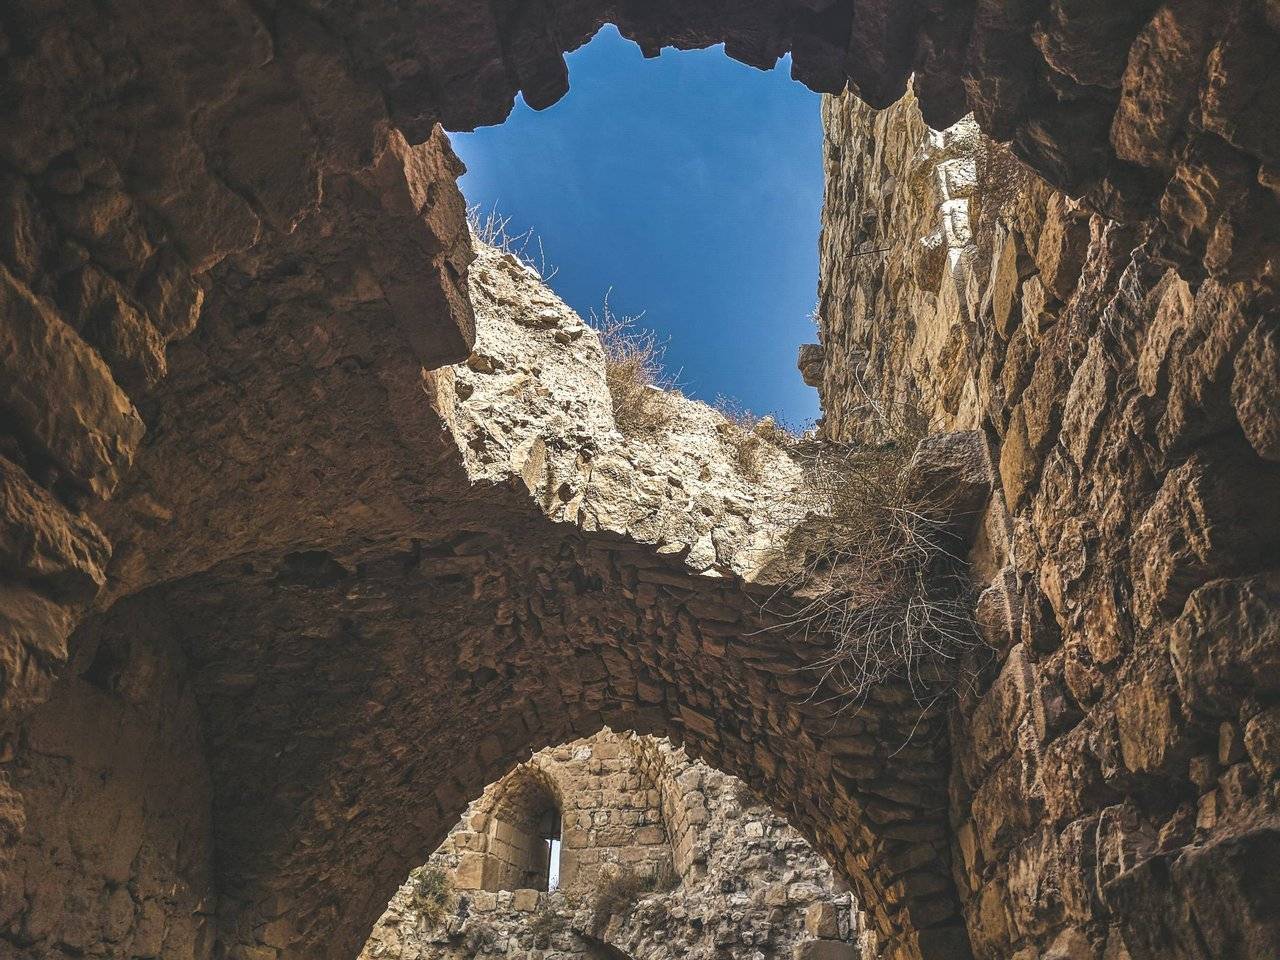   Al-Karak castle is one of the best examples of crusader castles wher eyou can see a mix of west European, Arab & Byzantine influence. Photo by Alis Monte [CC BY-SA 4.0], via Connecting the Dots